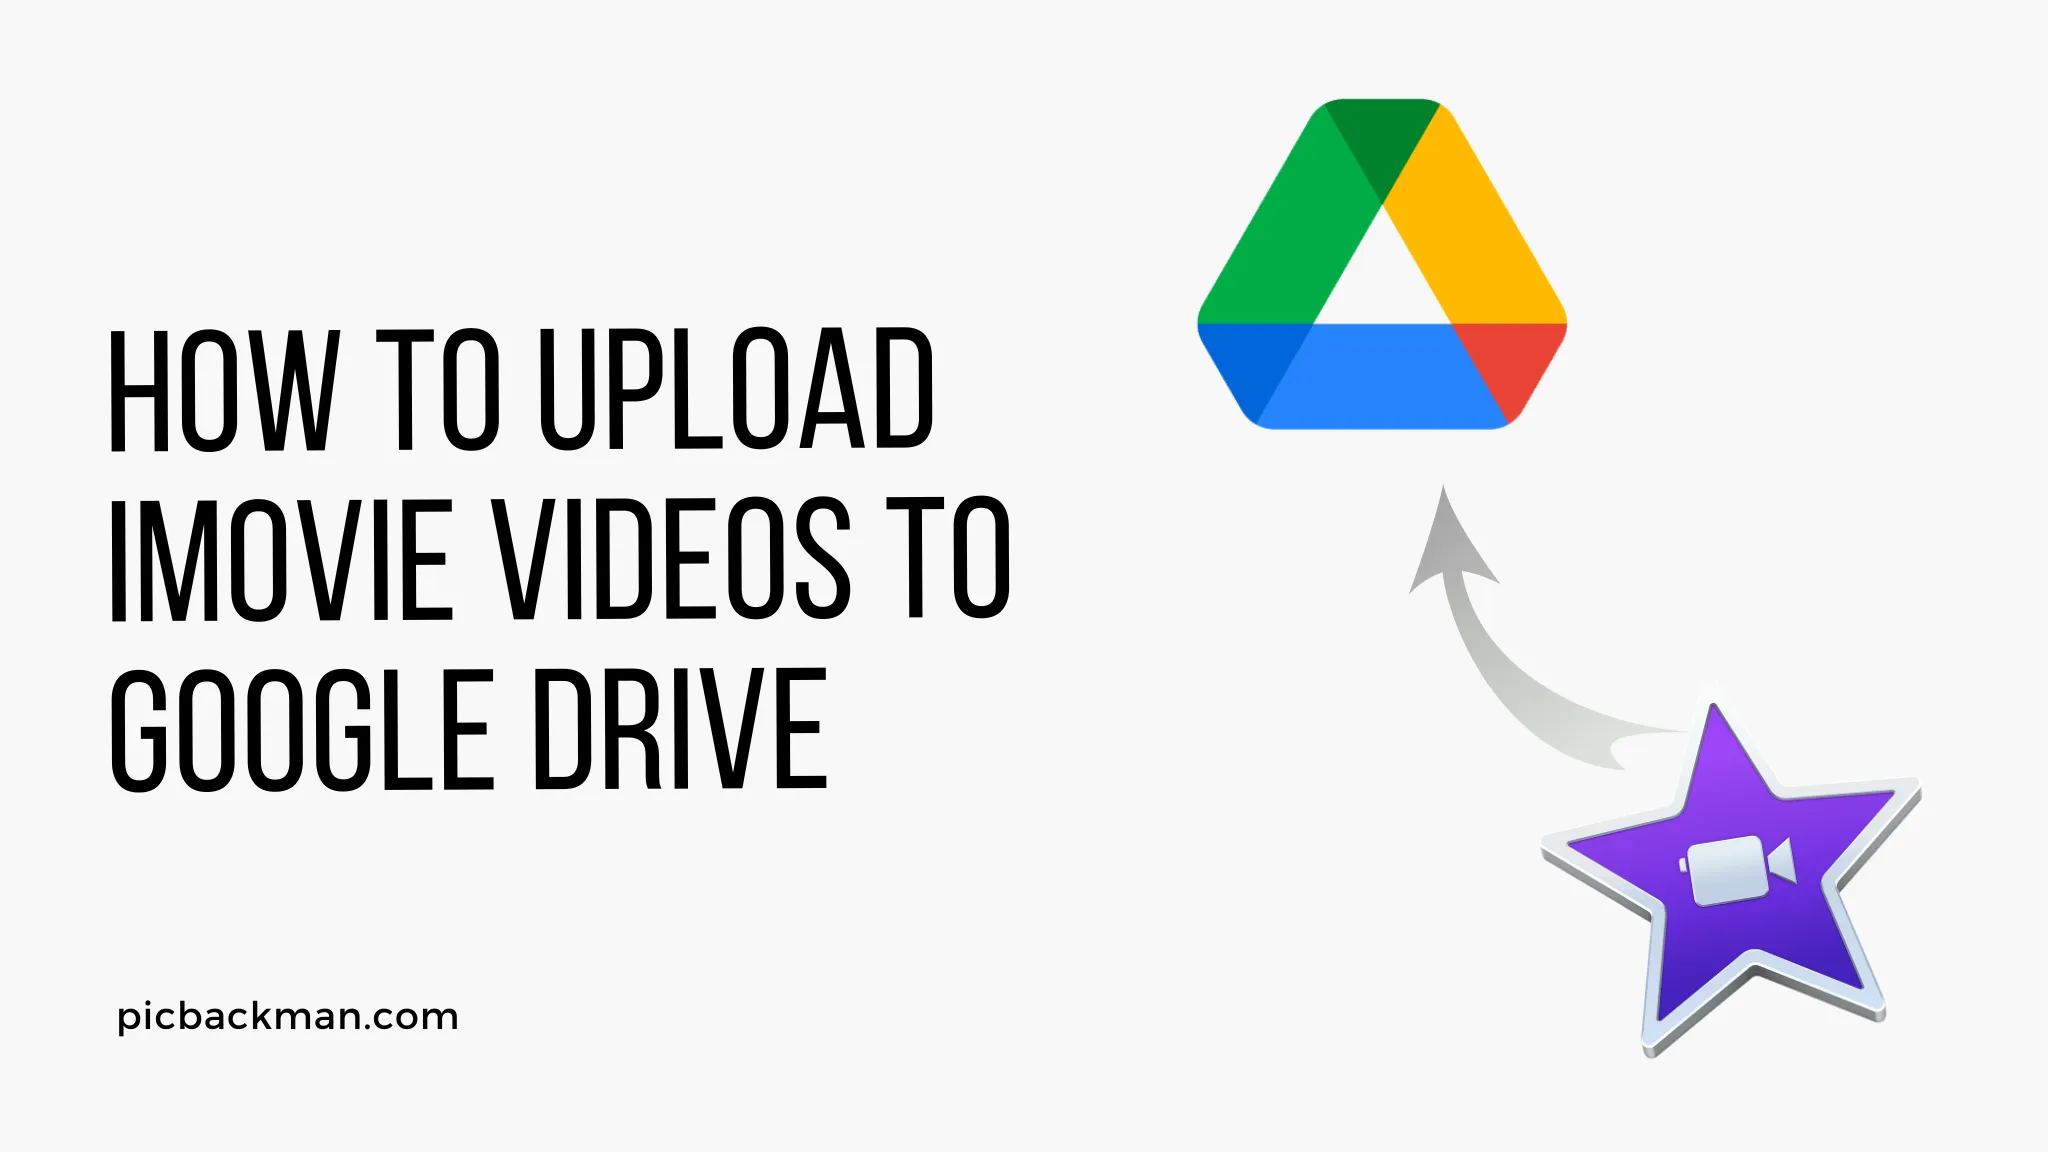 How to Upload iMovie Videos to Google Drive?